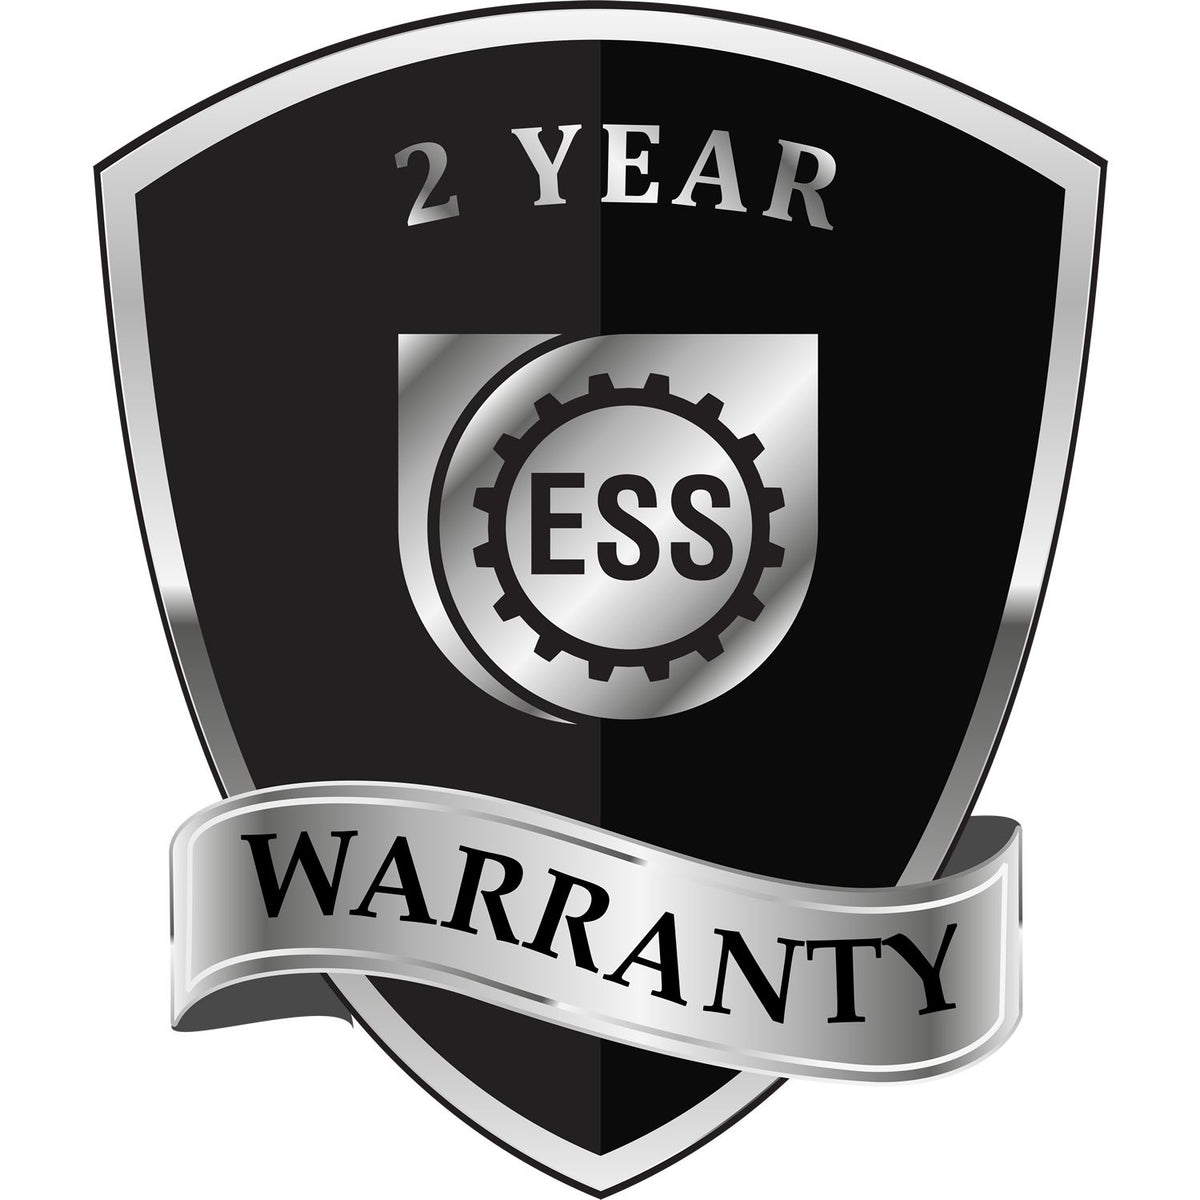 A badge or emblem showing a warranty icon for the Long Reach Alaska PE Seal